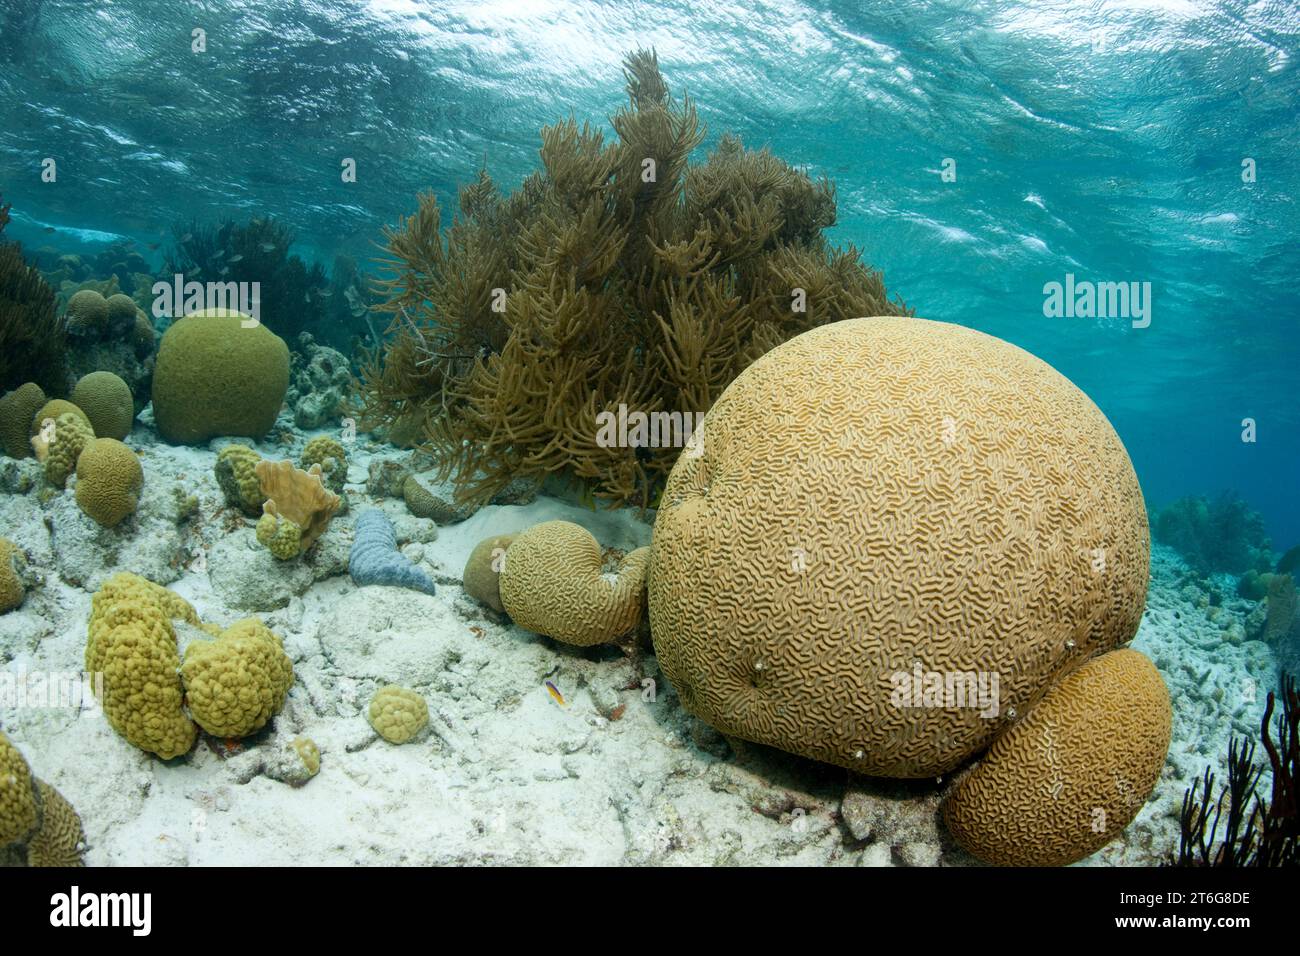 Large Brain coral (Diploria strigosa) rests in the shallow water near the island of Klein Bonaire. Stock Photo